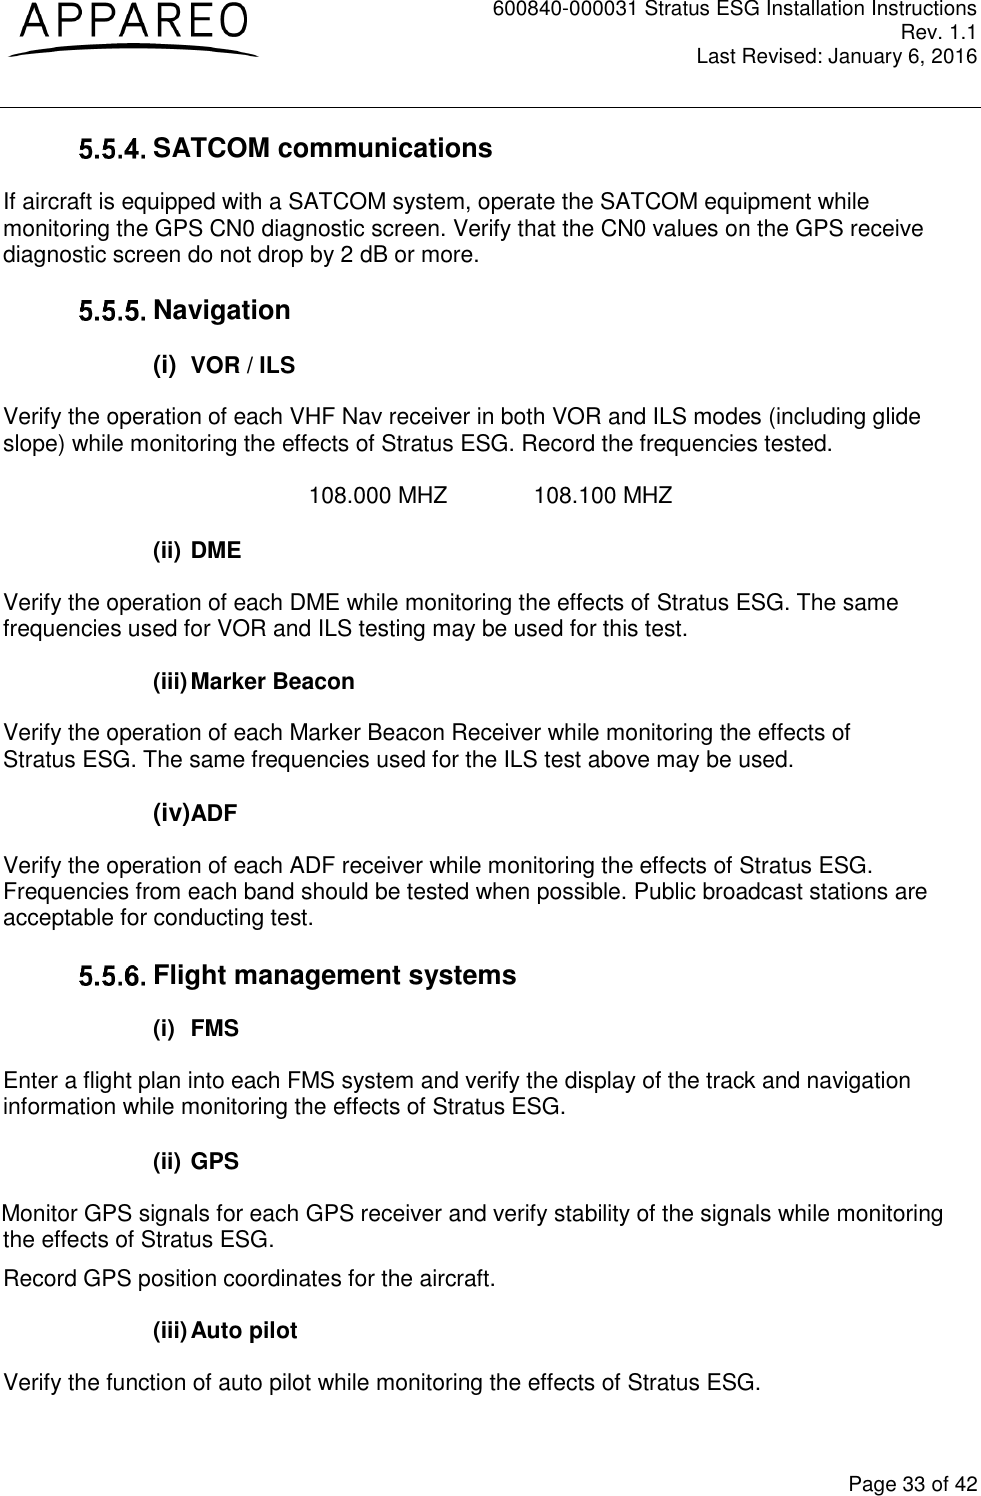 600840-000031 Stratus ESG Installation Instructions Rev. 1.1 Last Revised: January 6, 2016  Page 33 of 42  SATCOM communications  If aircraft is equipped with a SATCOM system, operate the SATCOM equipment while monitoring the GPS CN0 diagnostic screen. Verify that the CN0 values on the GPS receive diagnostic screen do not drop by 2 dB or more.   Navigation (i)  VOR / ILS Verify the operation of each VHF Nav receiver in both VOR and ILS modes (including glide slope) while monitoring the effects of Stratus ESG. Record the frequencies tested.  108.000 MHZ    108.100 MHZ  (ii) DME Verify the operation of each DME while monitoring the effects of Stratus ESG. The same frequencies used for VOR and ILS testing may be used for this test.  (iii) Marker Beacon Verify the operation of each Marker Beacon Receiver while monitoring the effects of Stratus ESG. The same frequencies used for the ILS test above may be used.  (iv)ADF Verify the operation of each ADF receiver while monitoring the effects of Stratus ESG. Frequencies from each band should be tested when possible. Public broadcast stations are acceptable for conducting test.   Flight management systems (i)  FMS Enter a flight plan into each FMS system and verify the display of the track and navigation information while monitoring the effects of Stratus ESG.  (ii) GPS Monitor GPS signals for each GPS receiver and verify stability of the signals while monitoring the effects of Stratus ESG. Record GPS position coordinates for the aircraft.  (iii) Auto pilot Verify the function of auto pilot while monitoring the effects of Stratus ESG. 